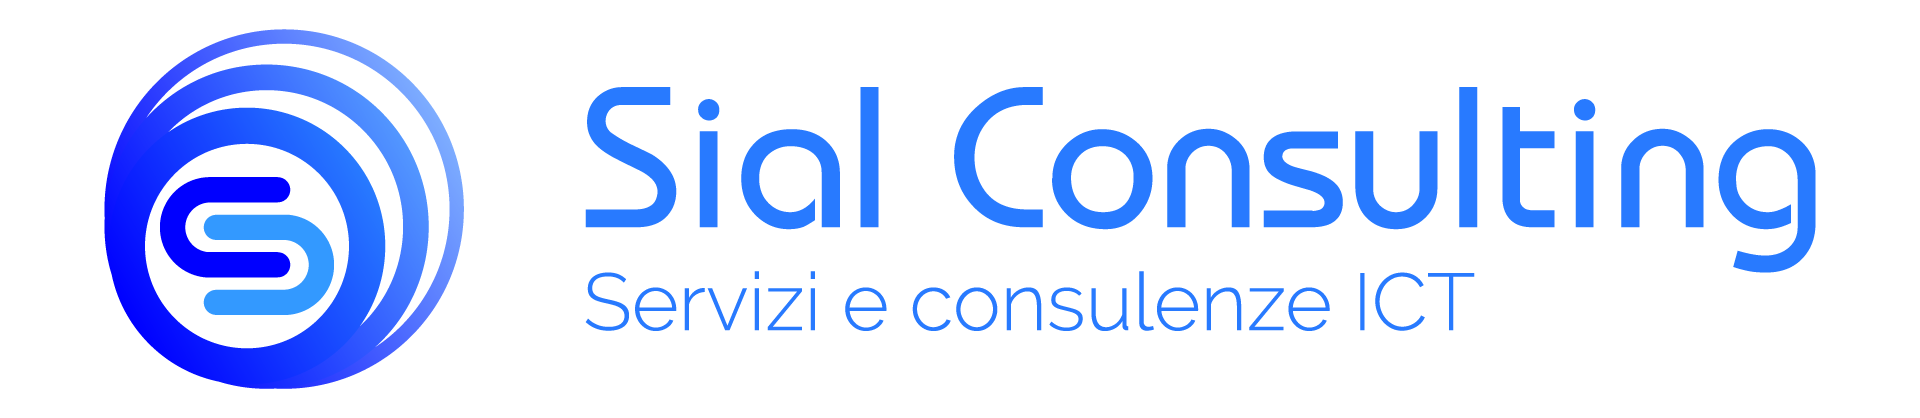 Sial Consulting